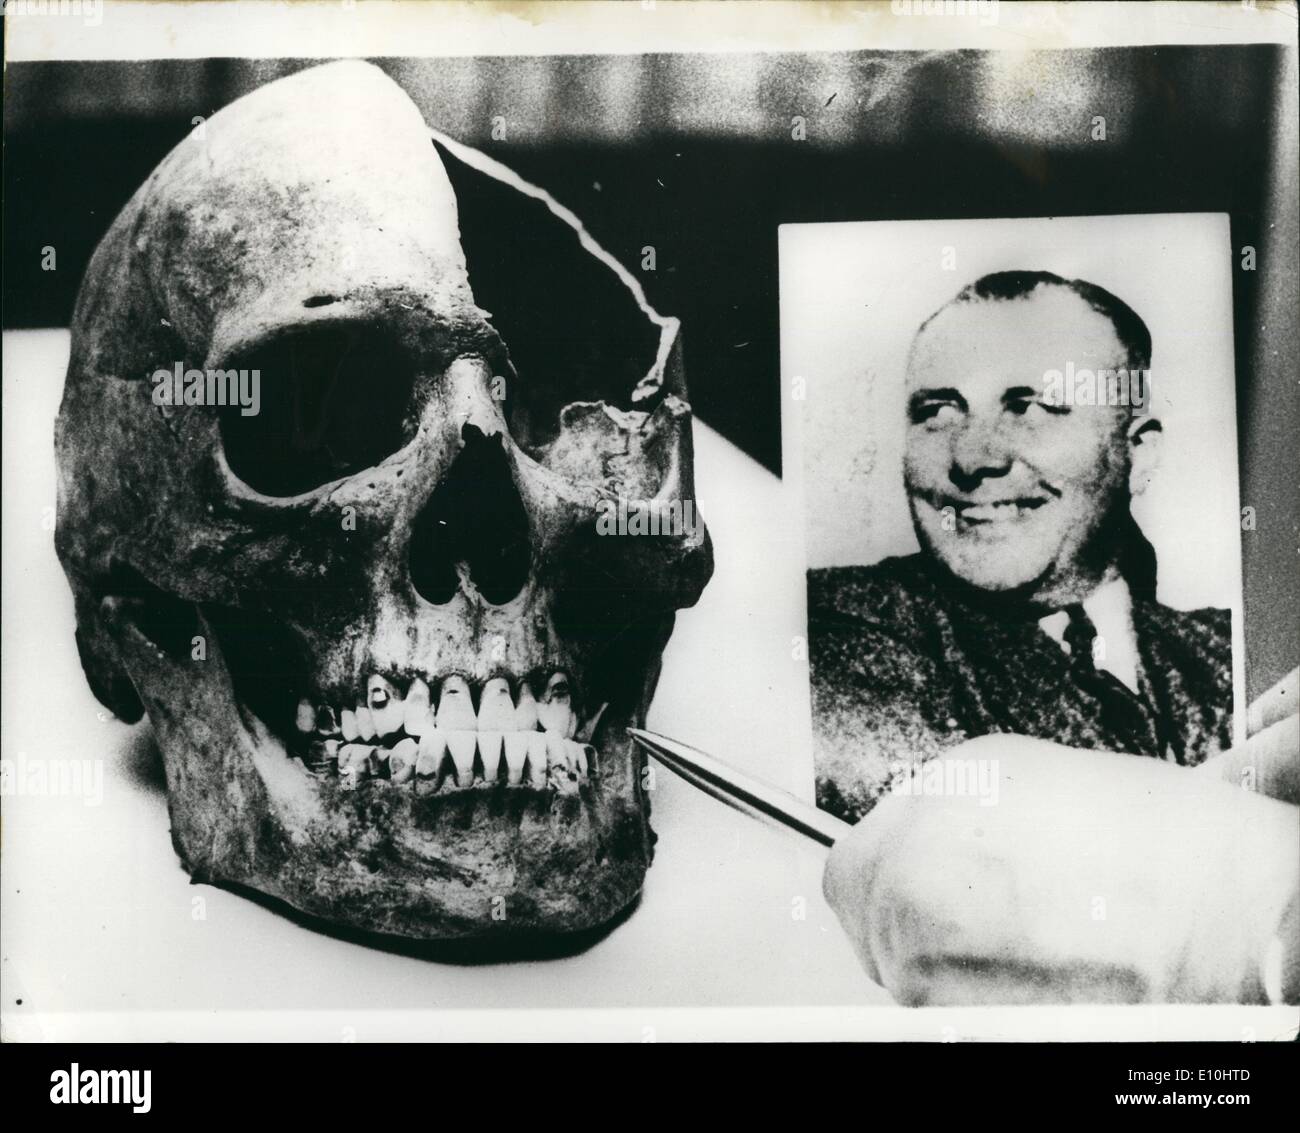 Dec. 12, 1972 - Is this skull of Martin Bormann: Two bones, a skull and an upper thigh were found in recent excavations in Berlin, Lehrt Station, where Martin Bormann, Hitler's Deputy, is said to have been killed in 1945. The Frankfurt public prosecutors office sent the dentals mould of the Nazi leader in Berlin. Photo Shows The skull, with well preserved teeth, pictured with a photgraph of Martin Bormann. Stock Photo